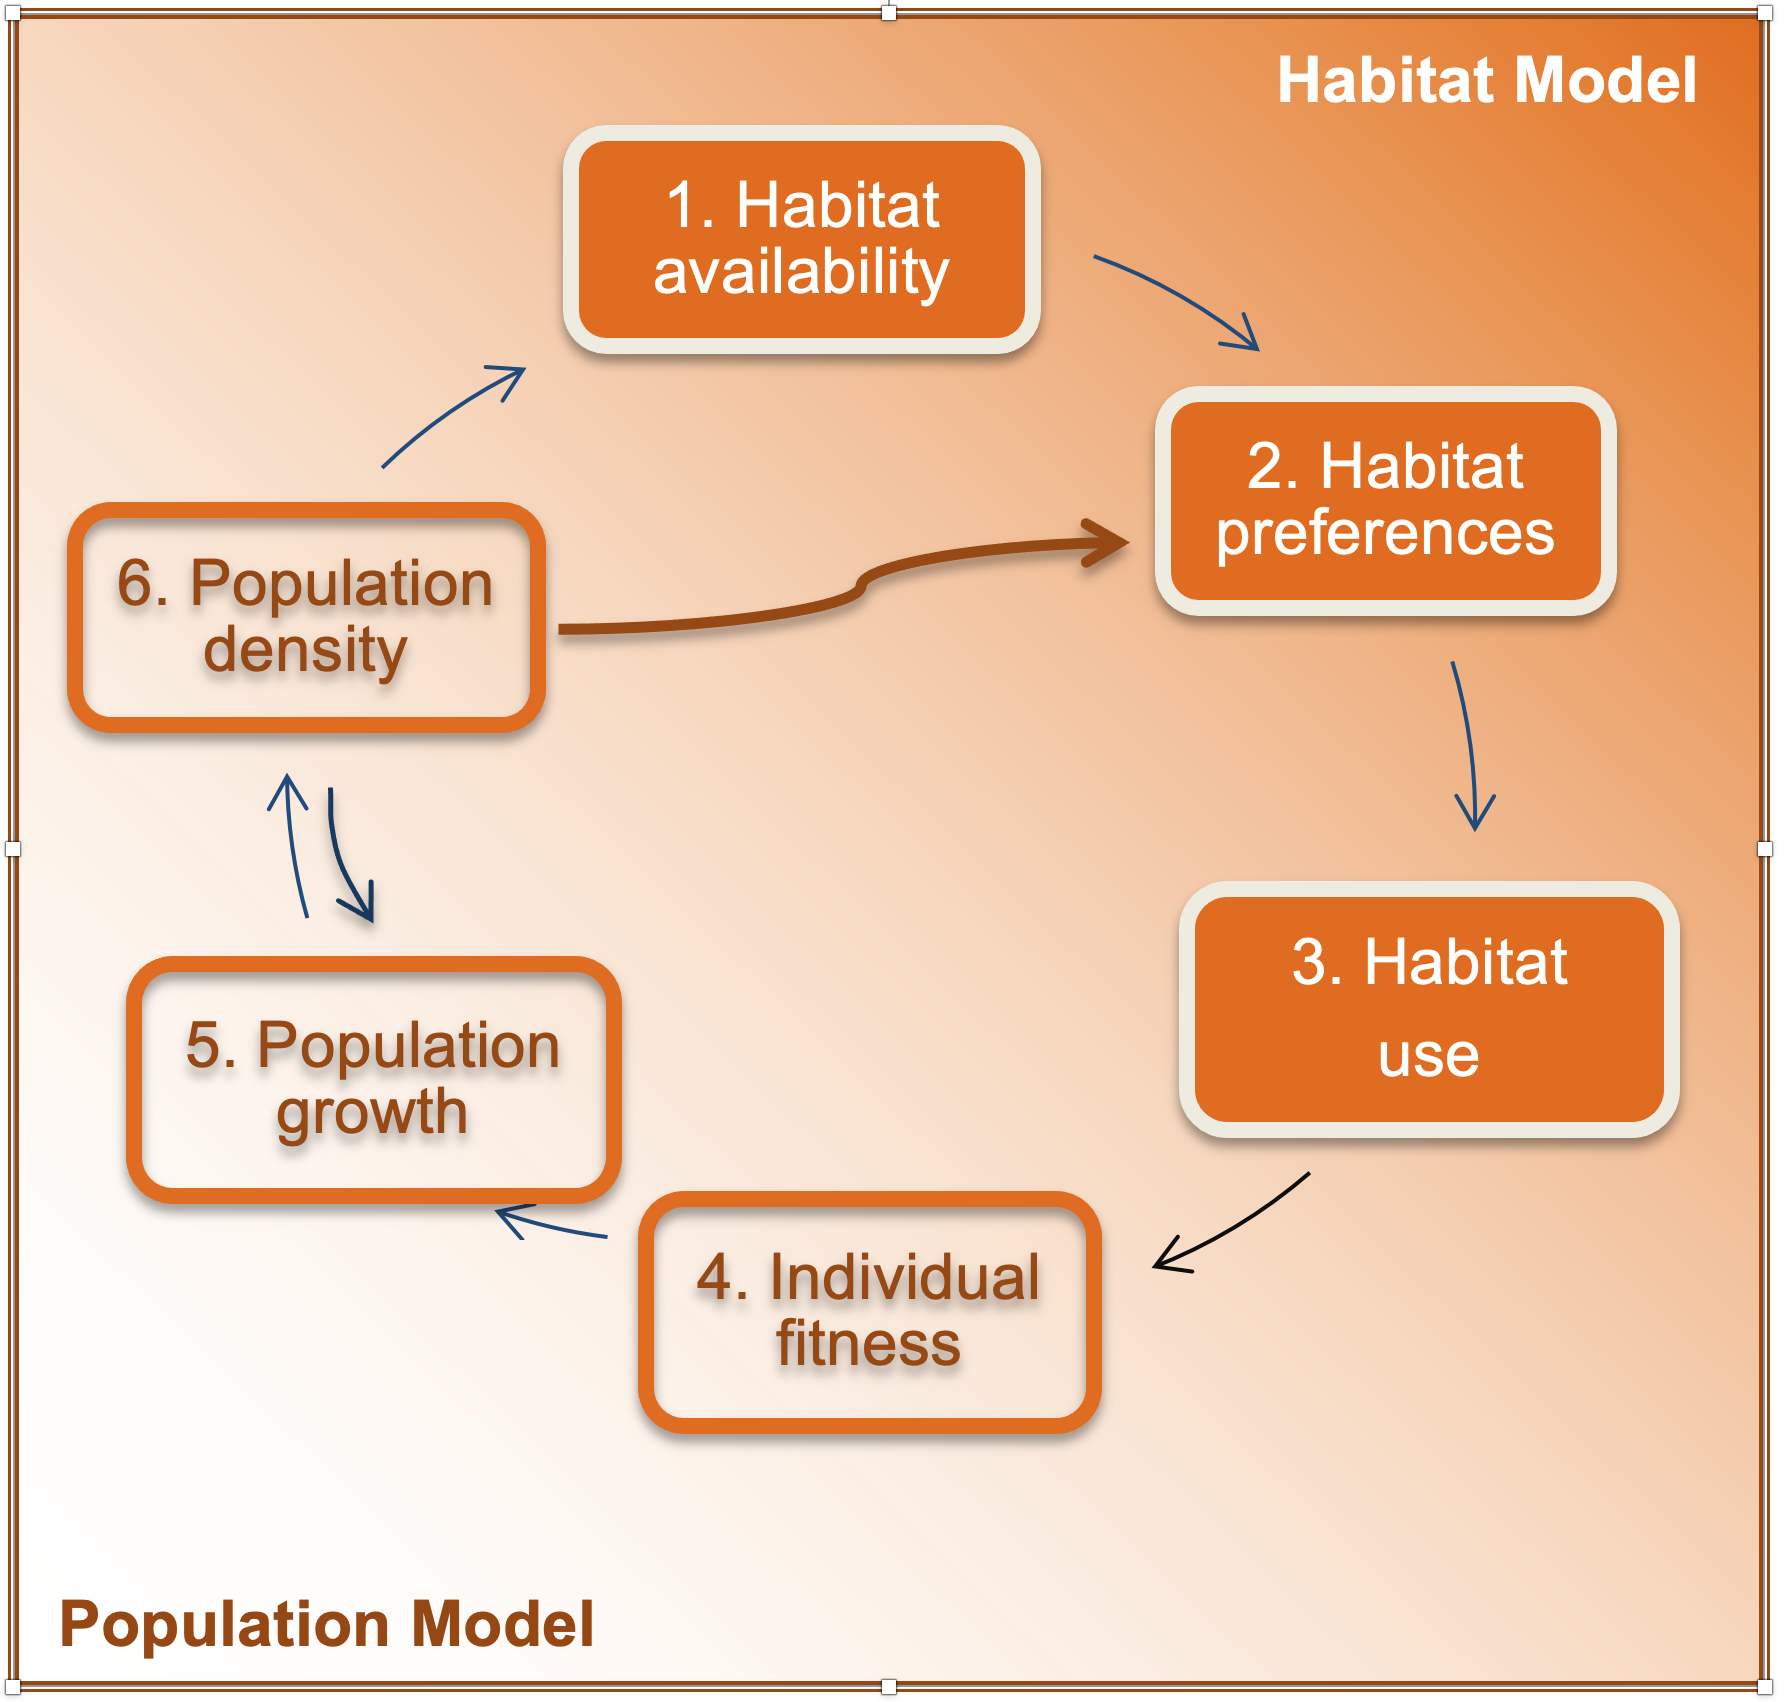 The chain highlighting how species fitness, dynamics and population distribution interact with habitat (modified from Jason Matthiopoulos, Field, & MacLeod, 2019). A region in space is characterized by the availability and spatial configuration of different habitat types (step 1). Organisms may actively or passively select specific habitats (step 2) which may lead them to use habitats disproportionately to their availability. Habitat availability and habitat selection give rise to the observed spatial distribution (step 3). The exposure of individuals to different habitat types will influence their fitness (step 4), which determines the collective capability of a population to grow (step 5). Processes of population change determine current population density (step 6), which has the opportunity to alter habitat availability and feed back directly into habitat selection and population growth via density dependent and spatial crowding.